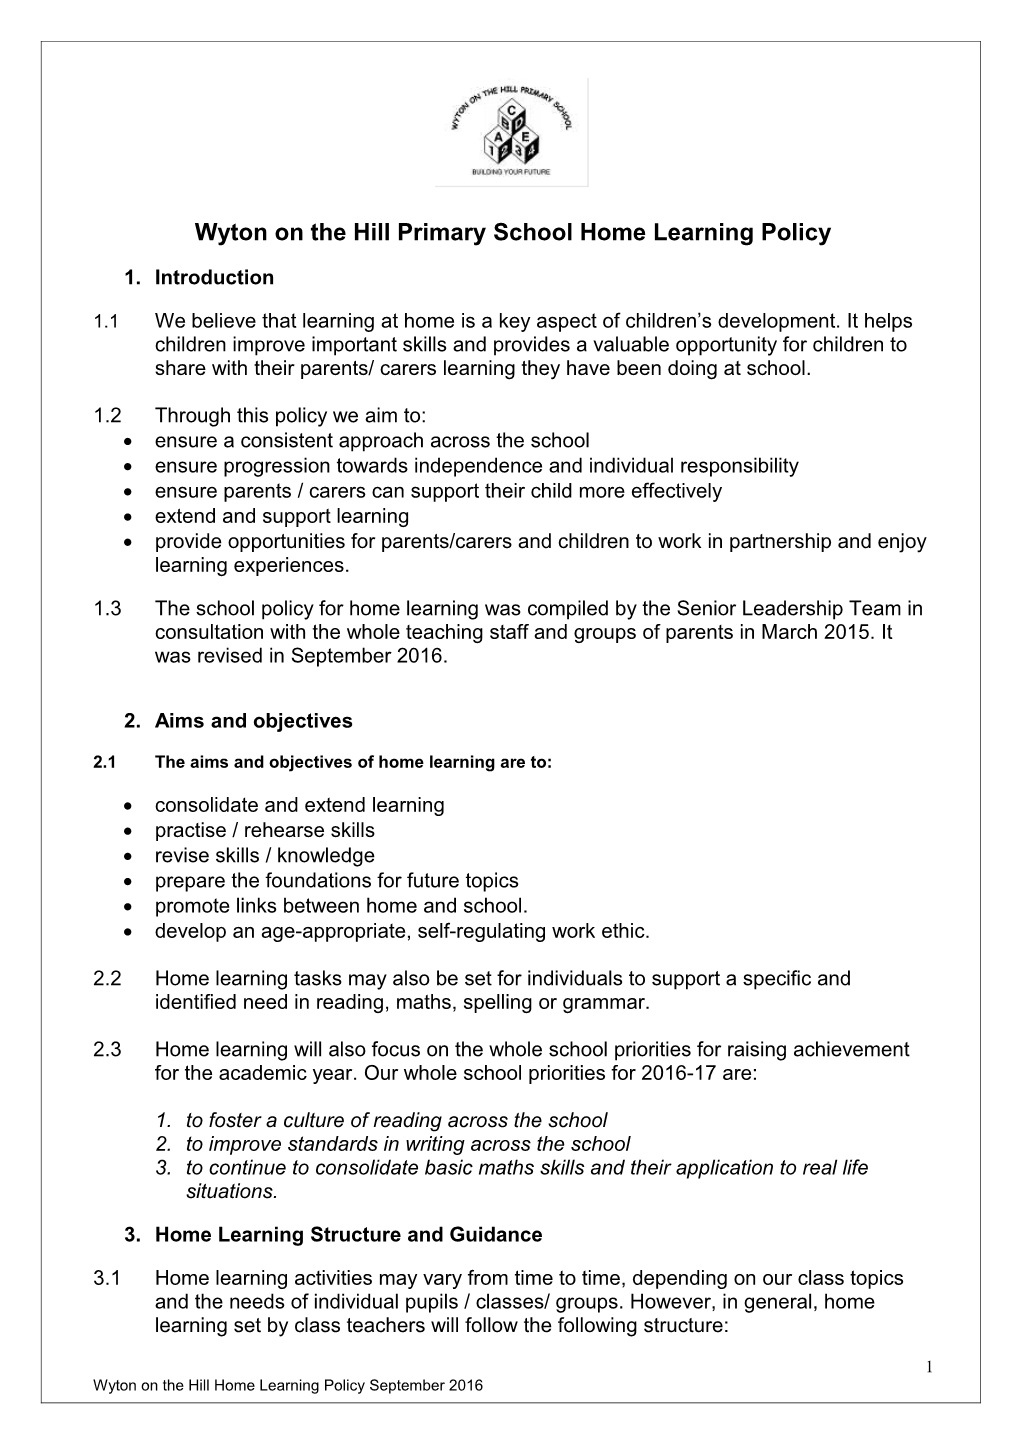 Wyton on the Hill Primary Schoolhome Learning Policy